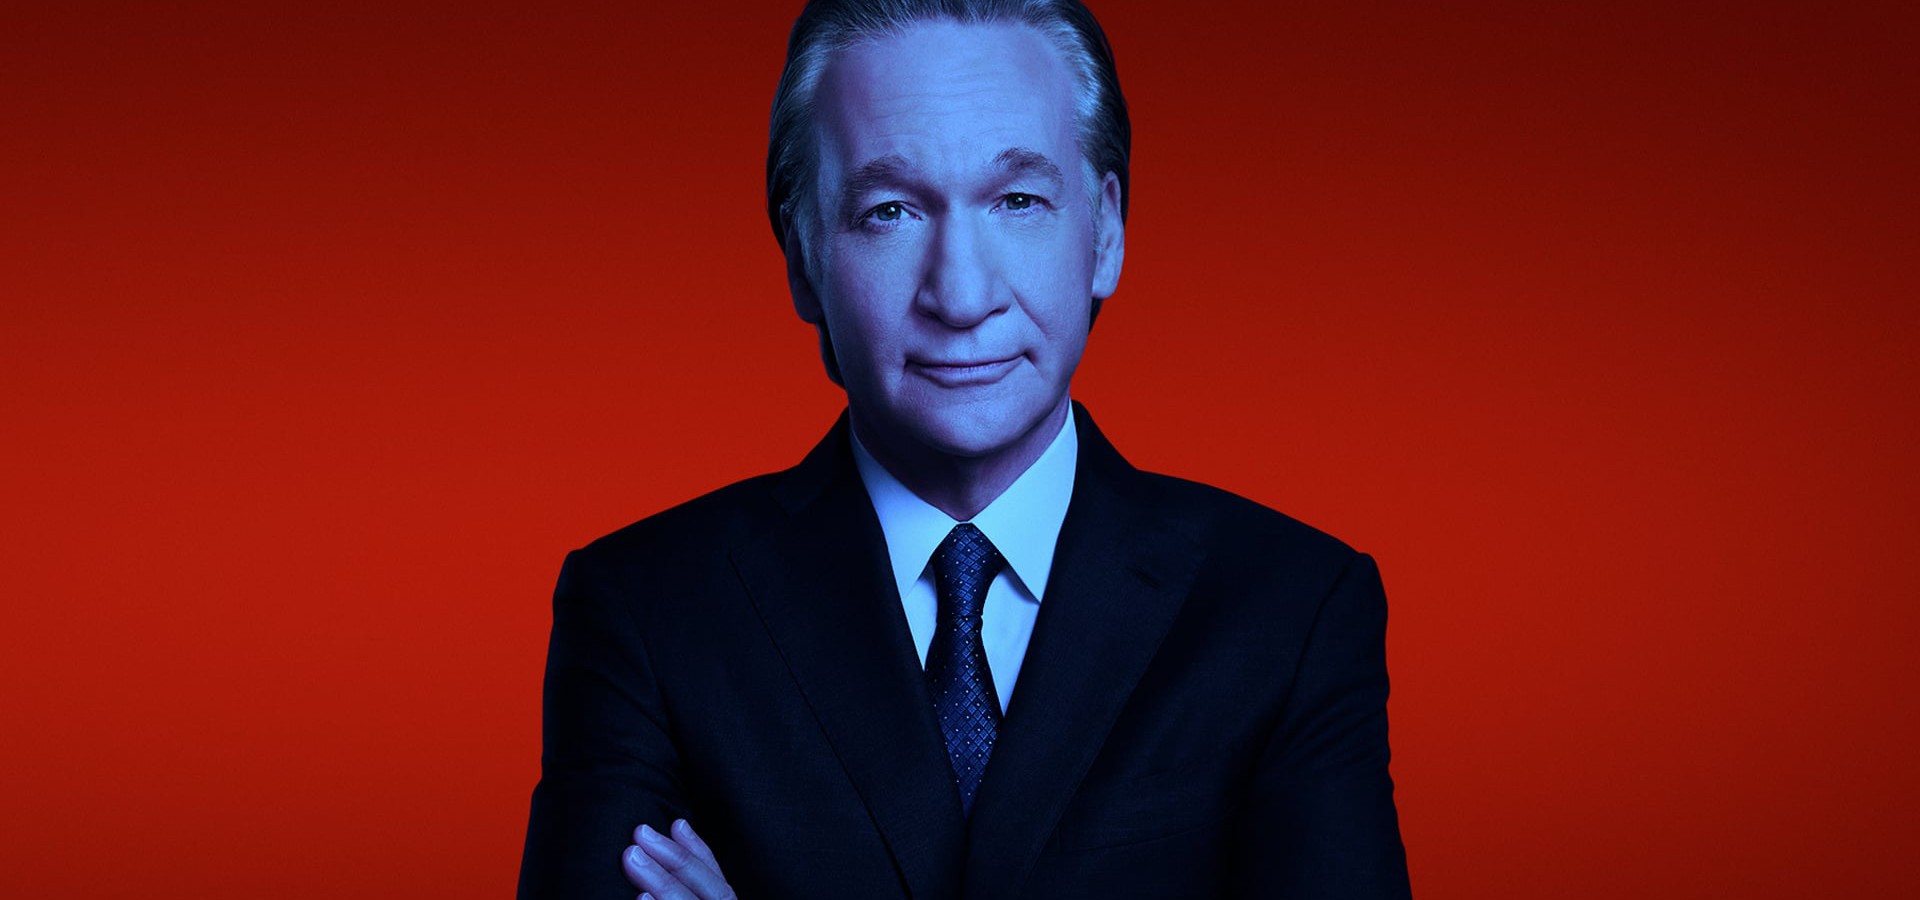 Real Time with Bill Maher Season 19 episodes streaming online